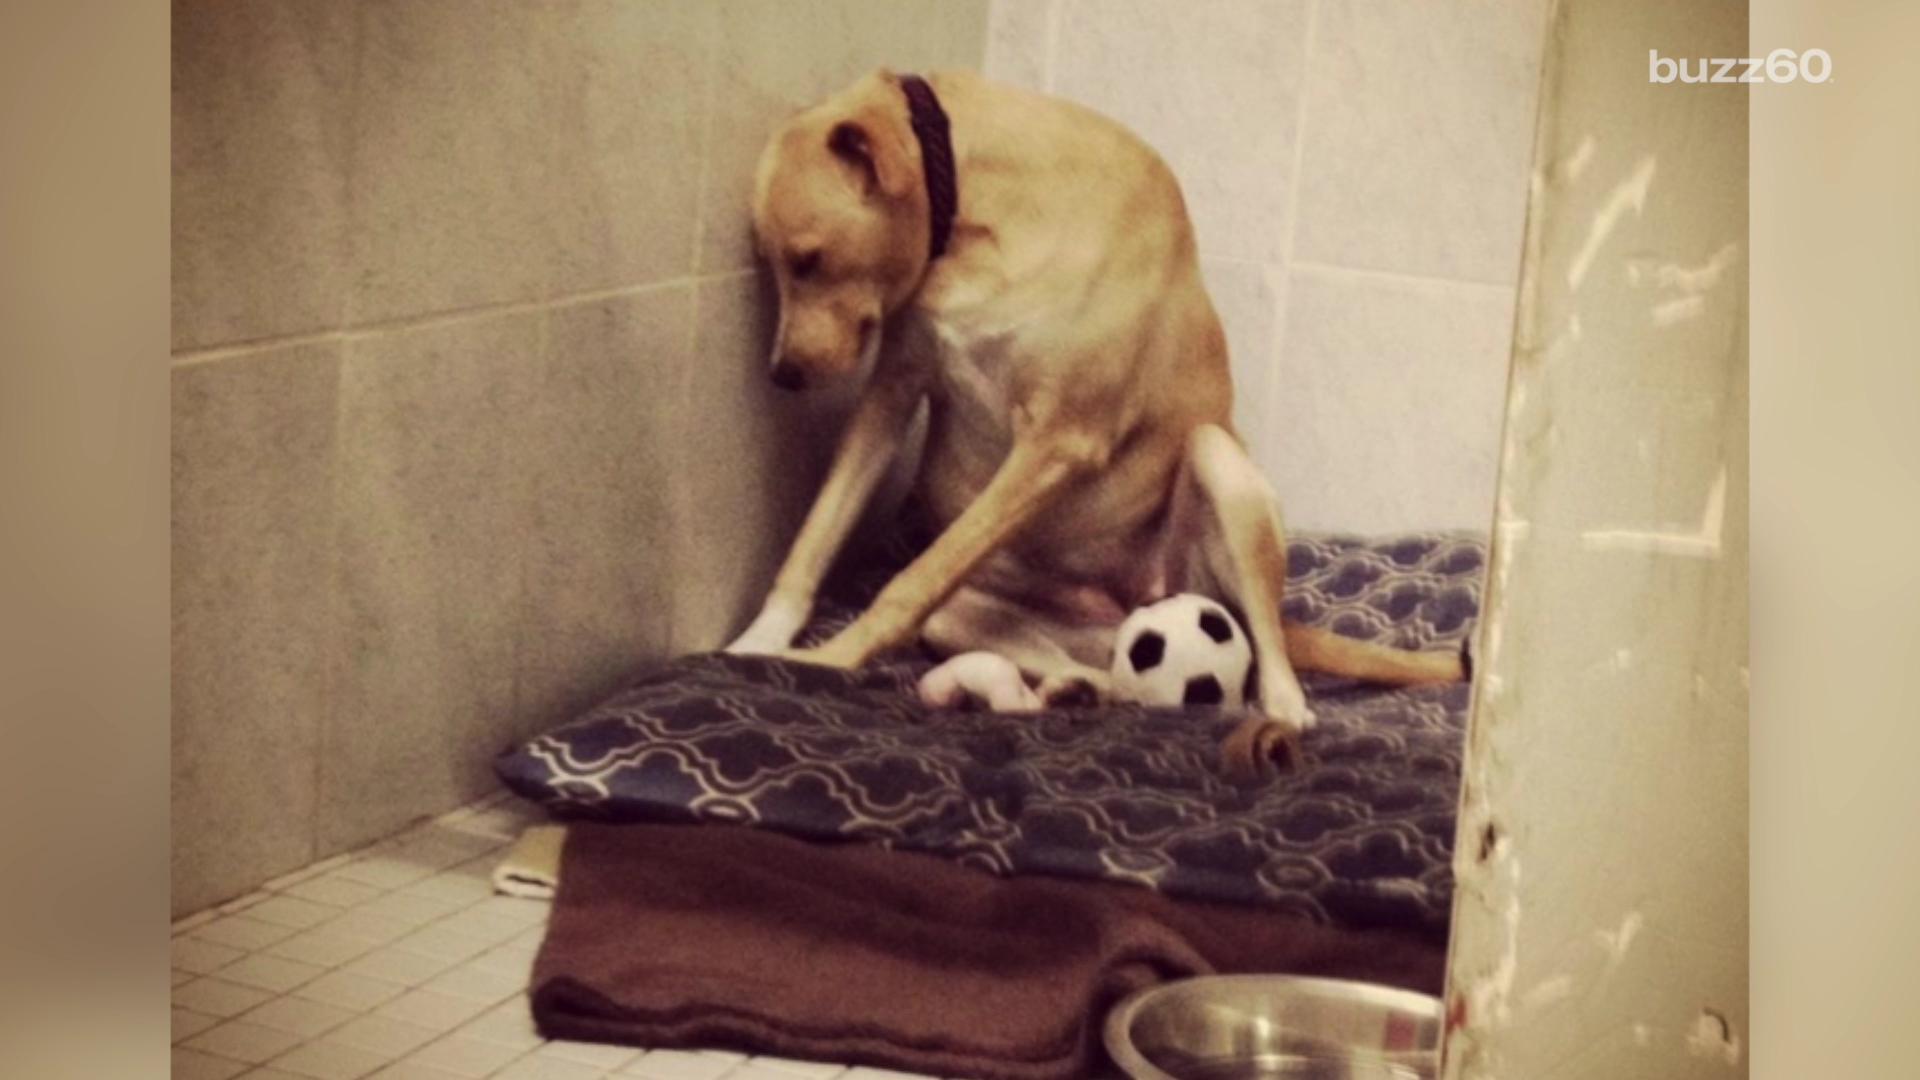 Photos of 'The Saddest Dog in the World' go viral